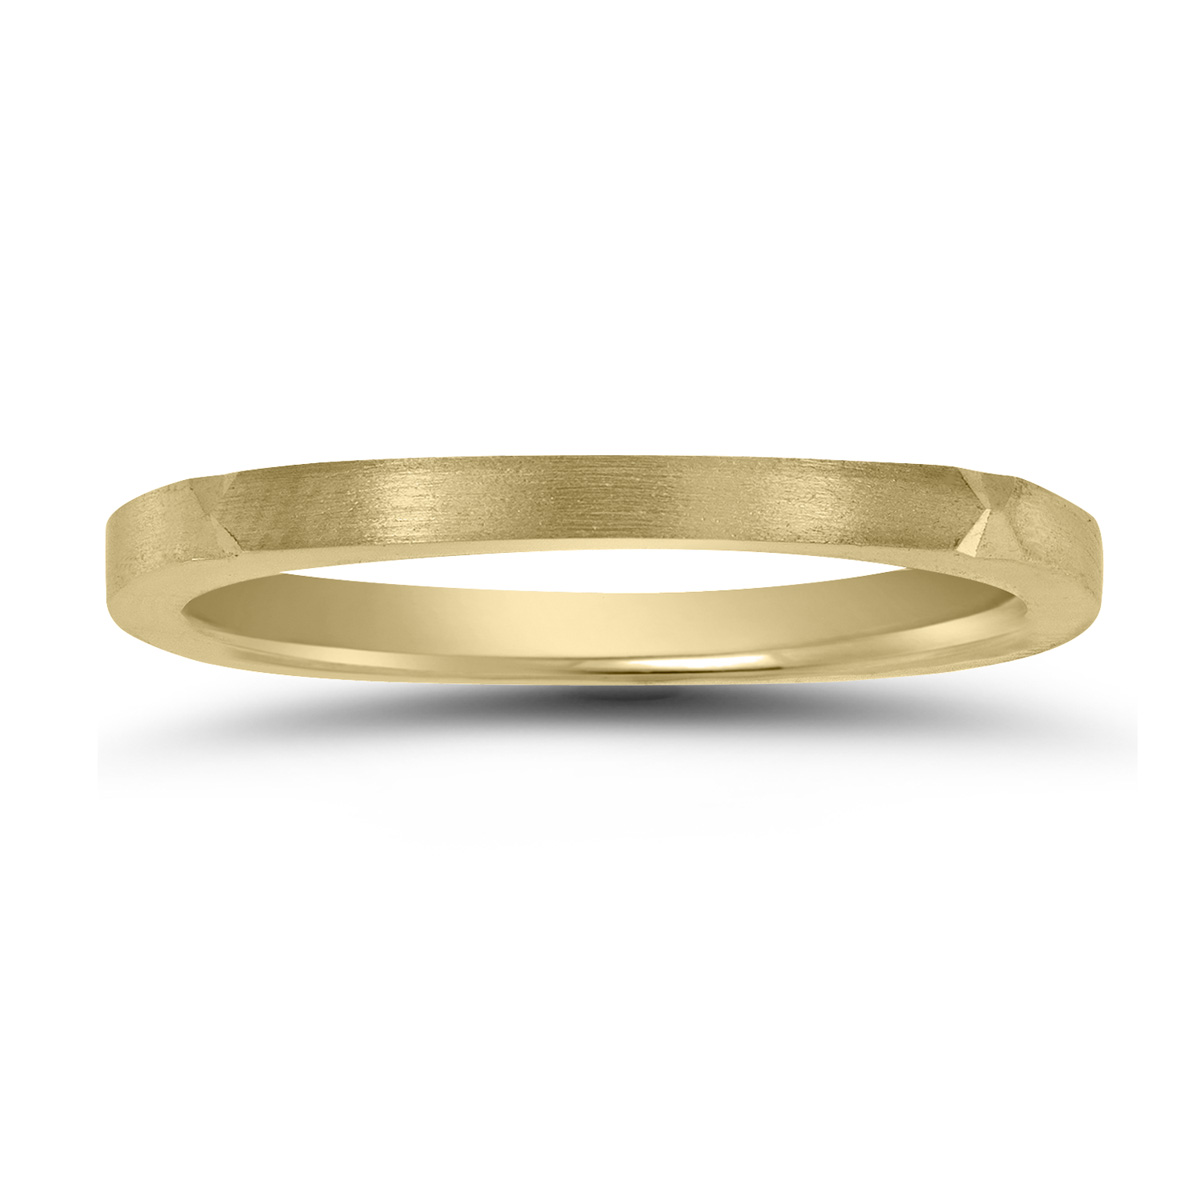 Thin 1.5MM Four Sided Wedding Band with Matte Finish in 14K Yellow Gold